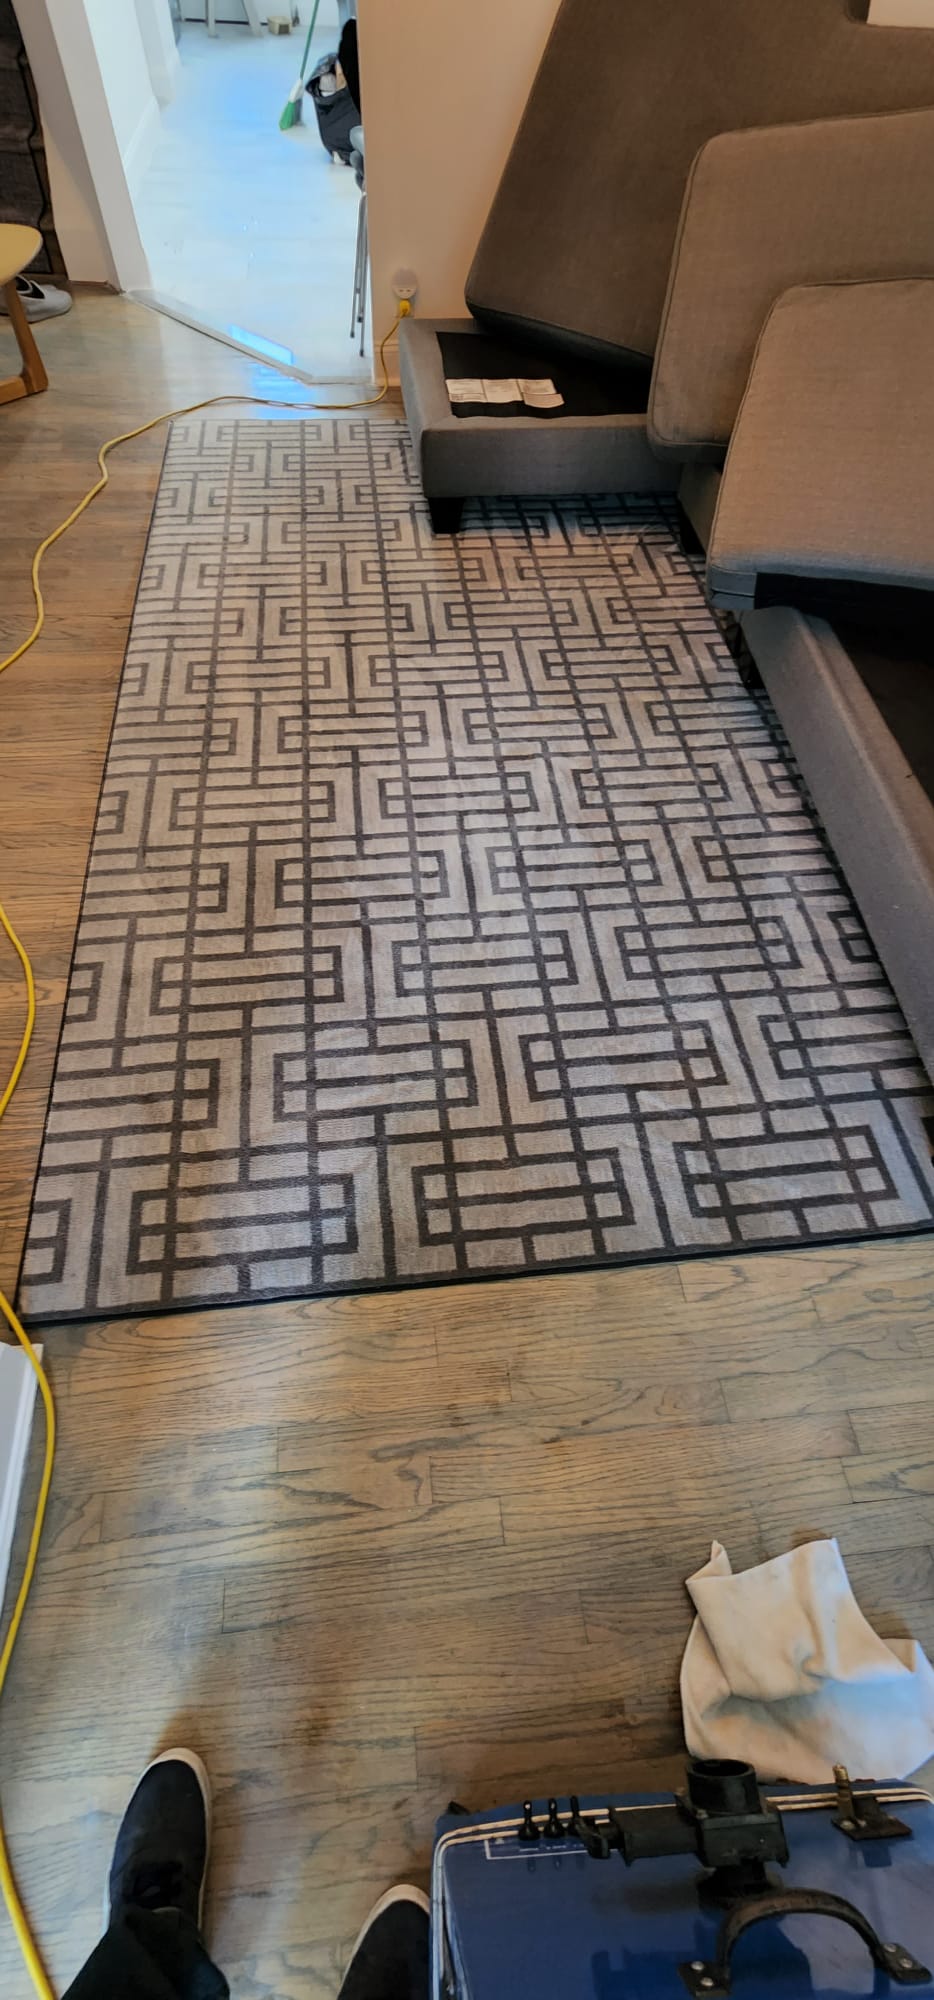 rug cleaning nyc